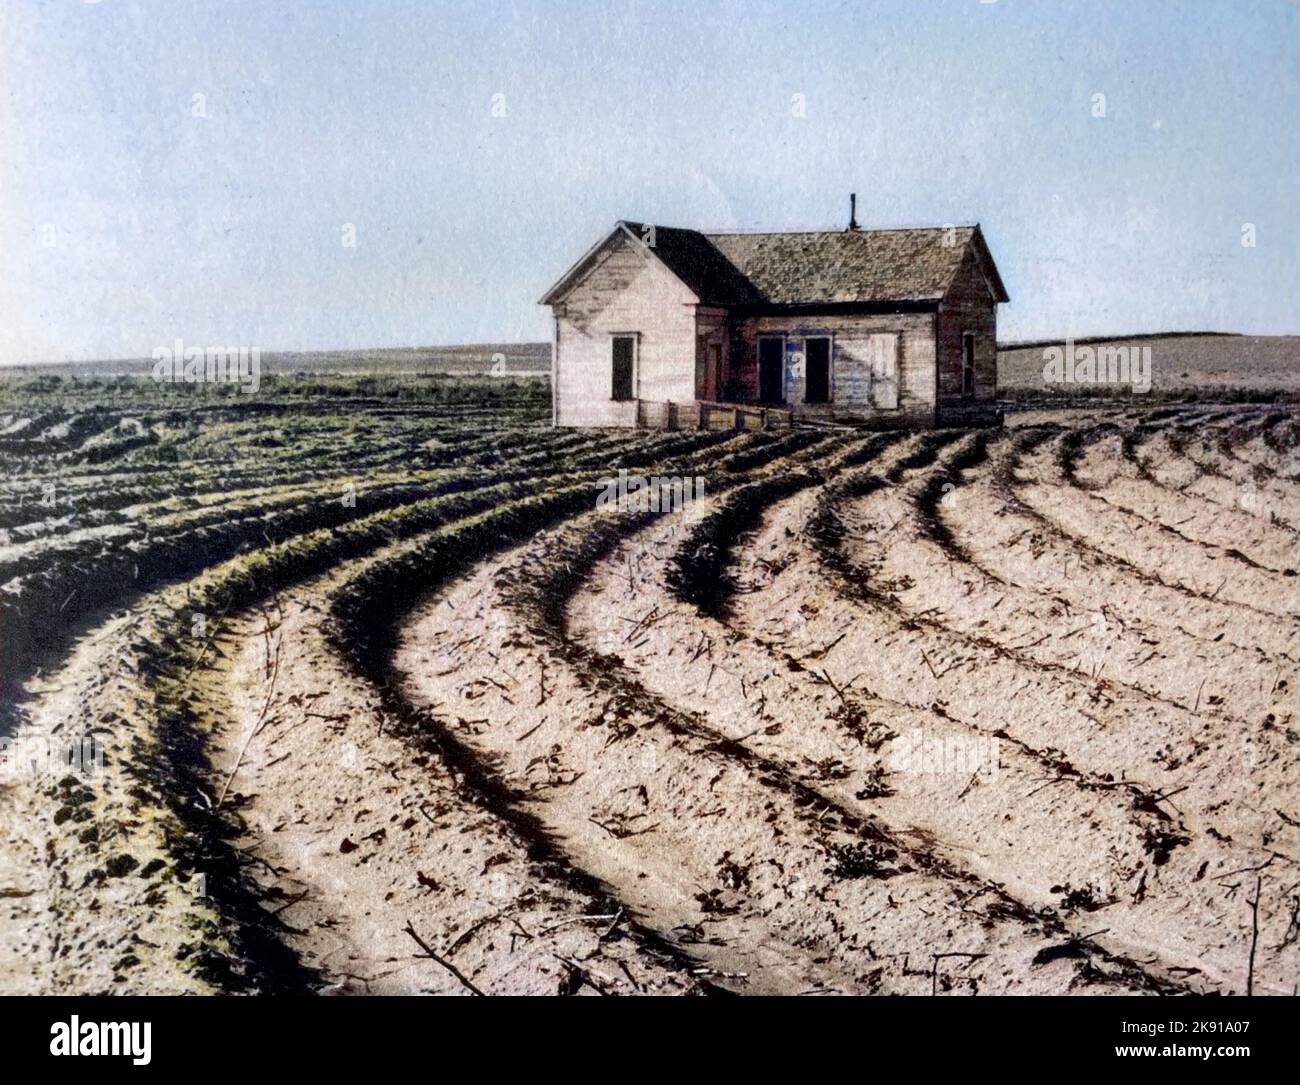 Abandoned Farms During The Dust Bowl by Bettmann